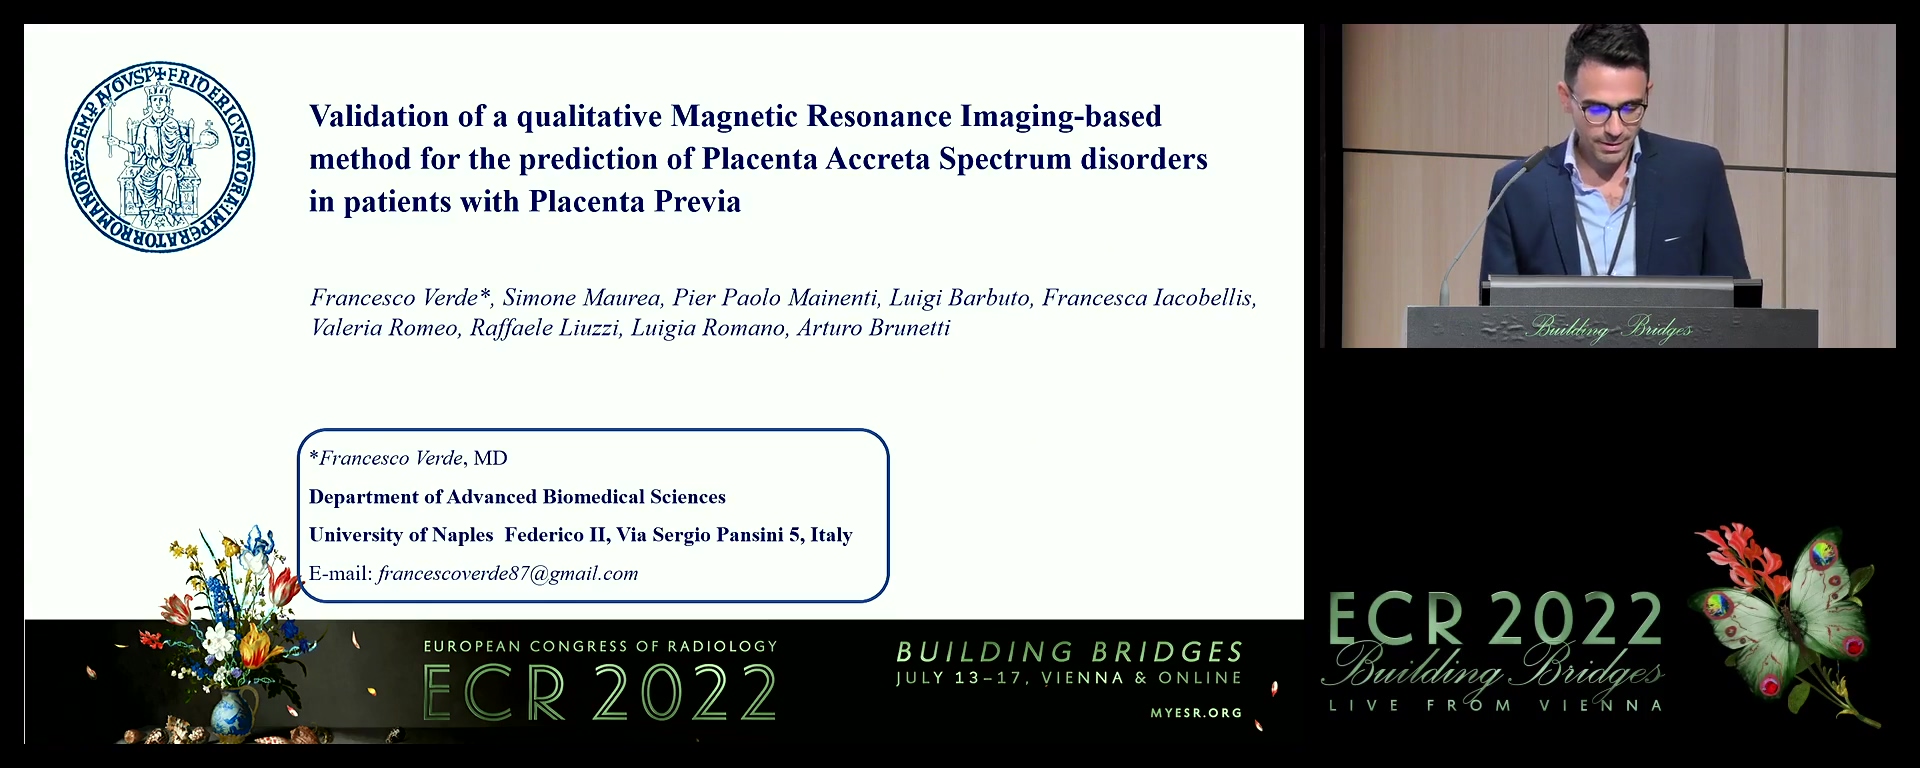 Validation of a qualitative magnetic resonance imaging-based method to predict placenta accreta spectrum disorders in patients with placenta previa